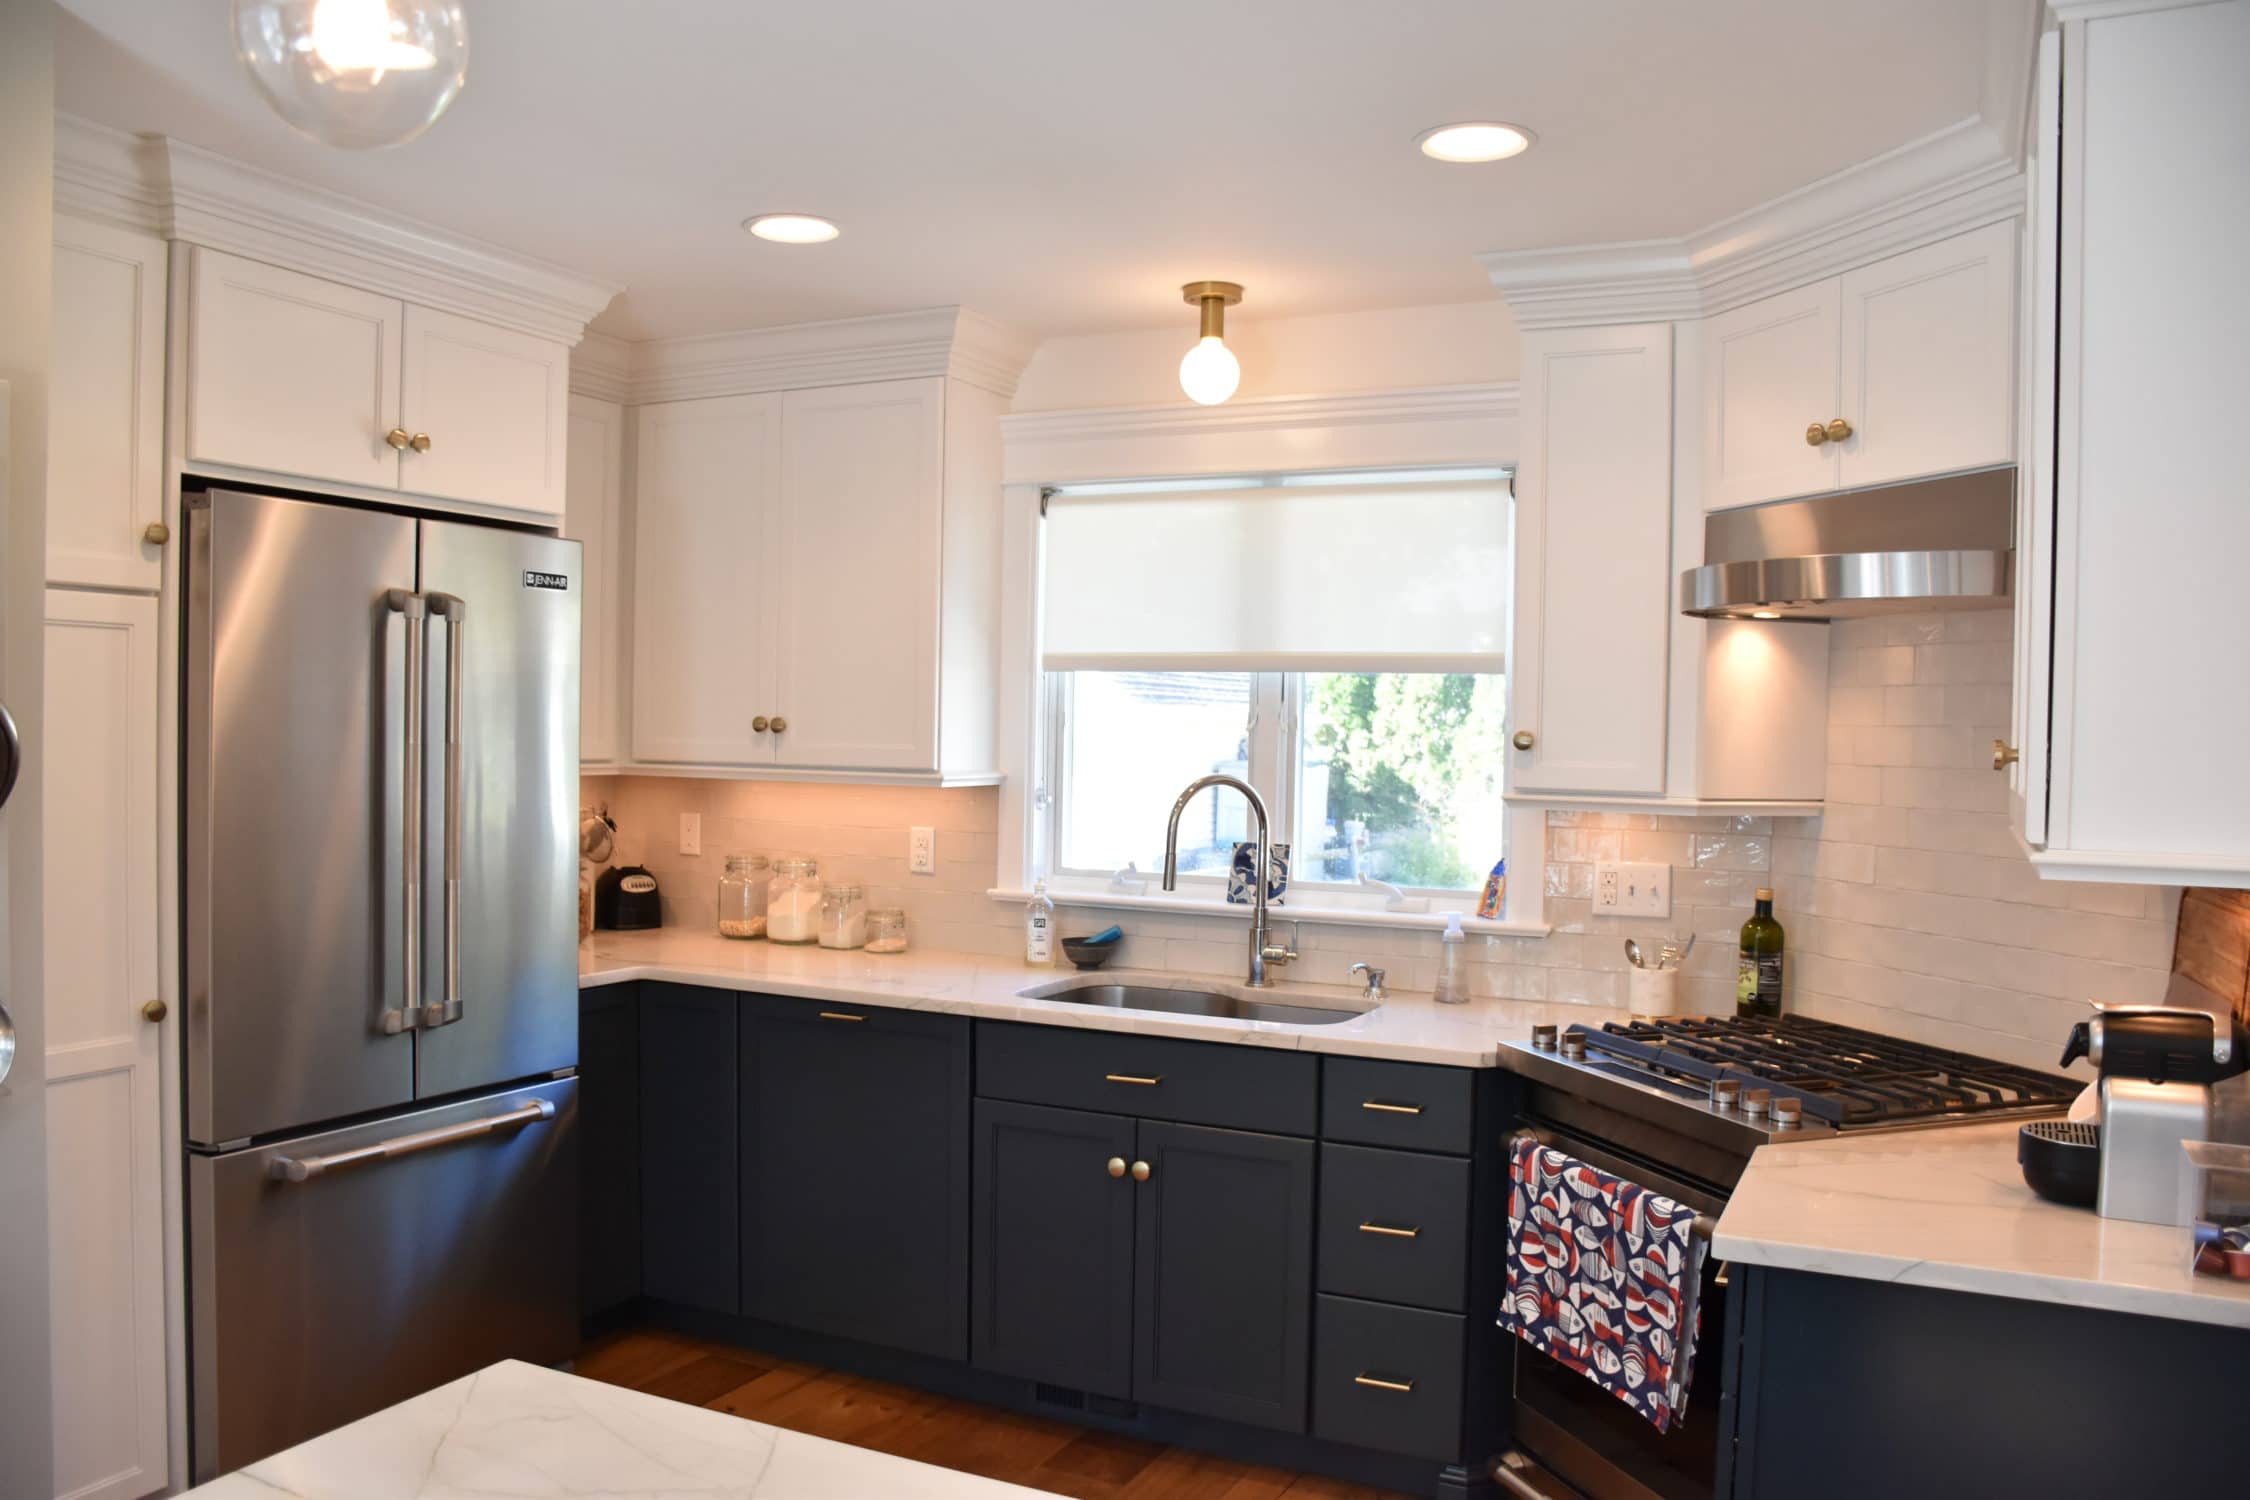 Top 10 Creative Ideas for NJ Kitchen Remodeling in 2019